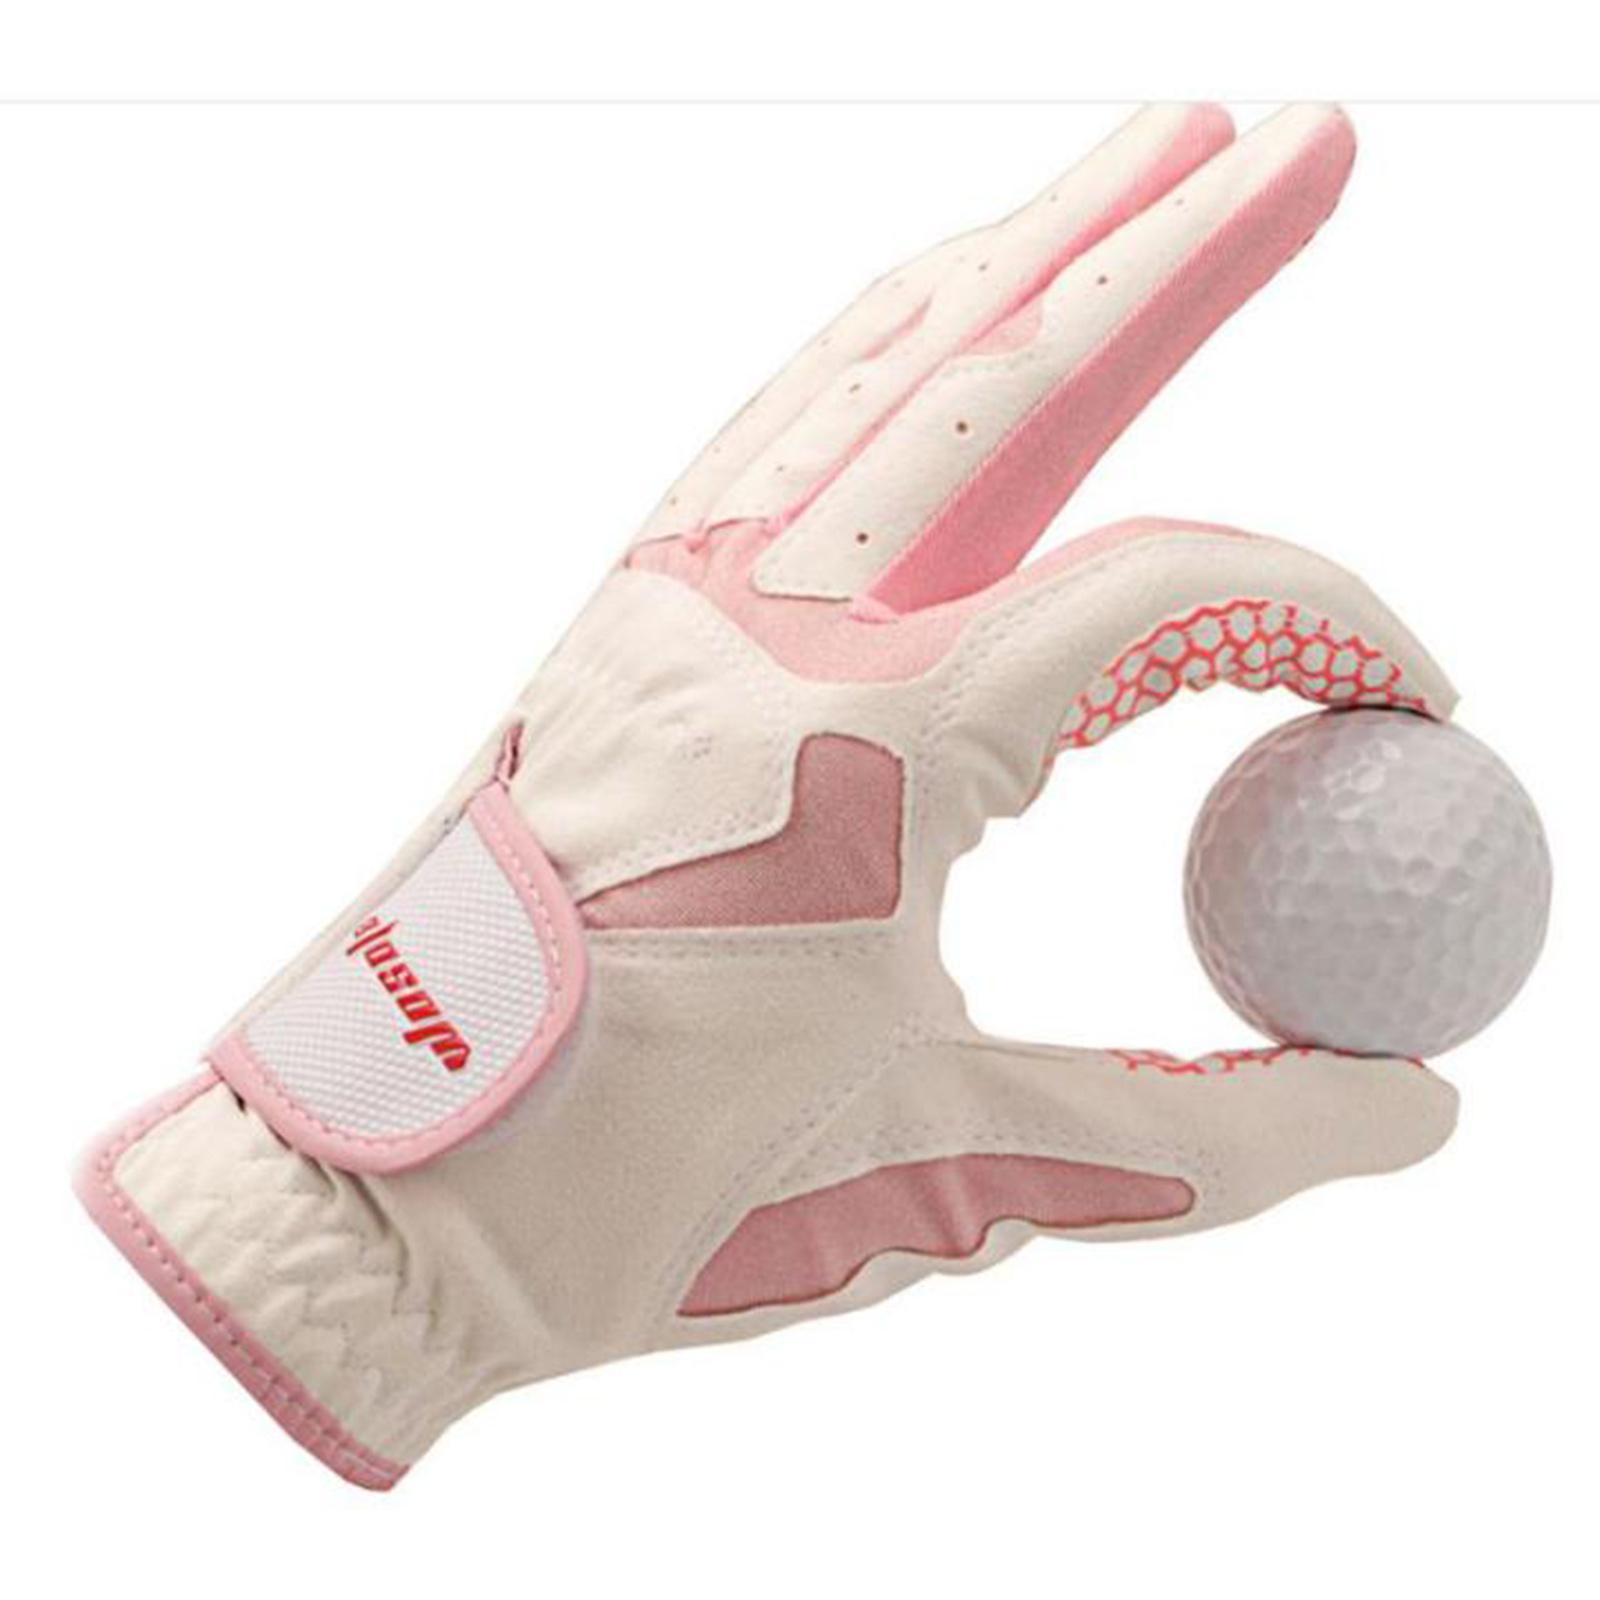 1 Pair Golf Glove Comfortable Synthetic Breathable Golf Equipment Women 21